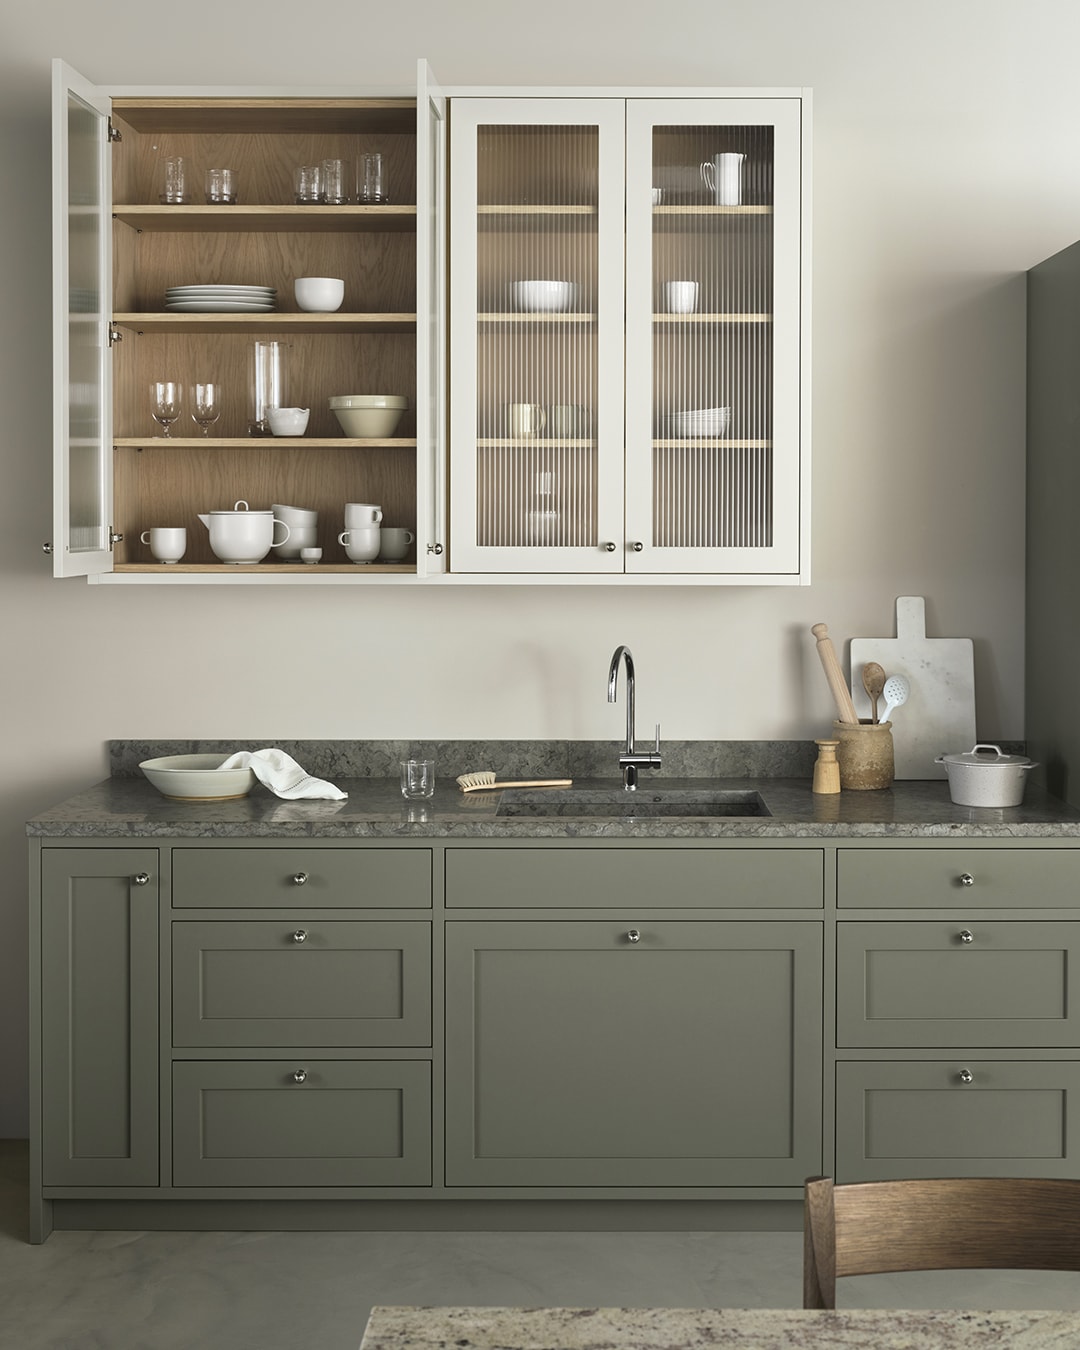 14 inspiring kitchens with sage green cabinets for a subtle fresh look -  COCO LAPINE DESIGN